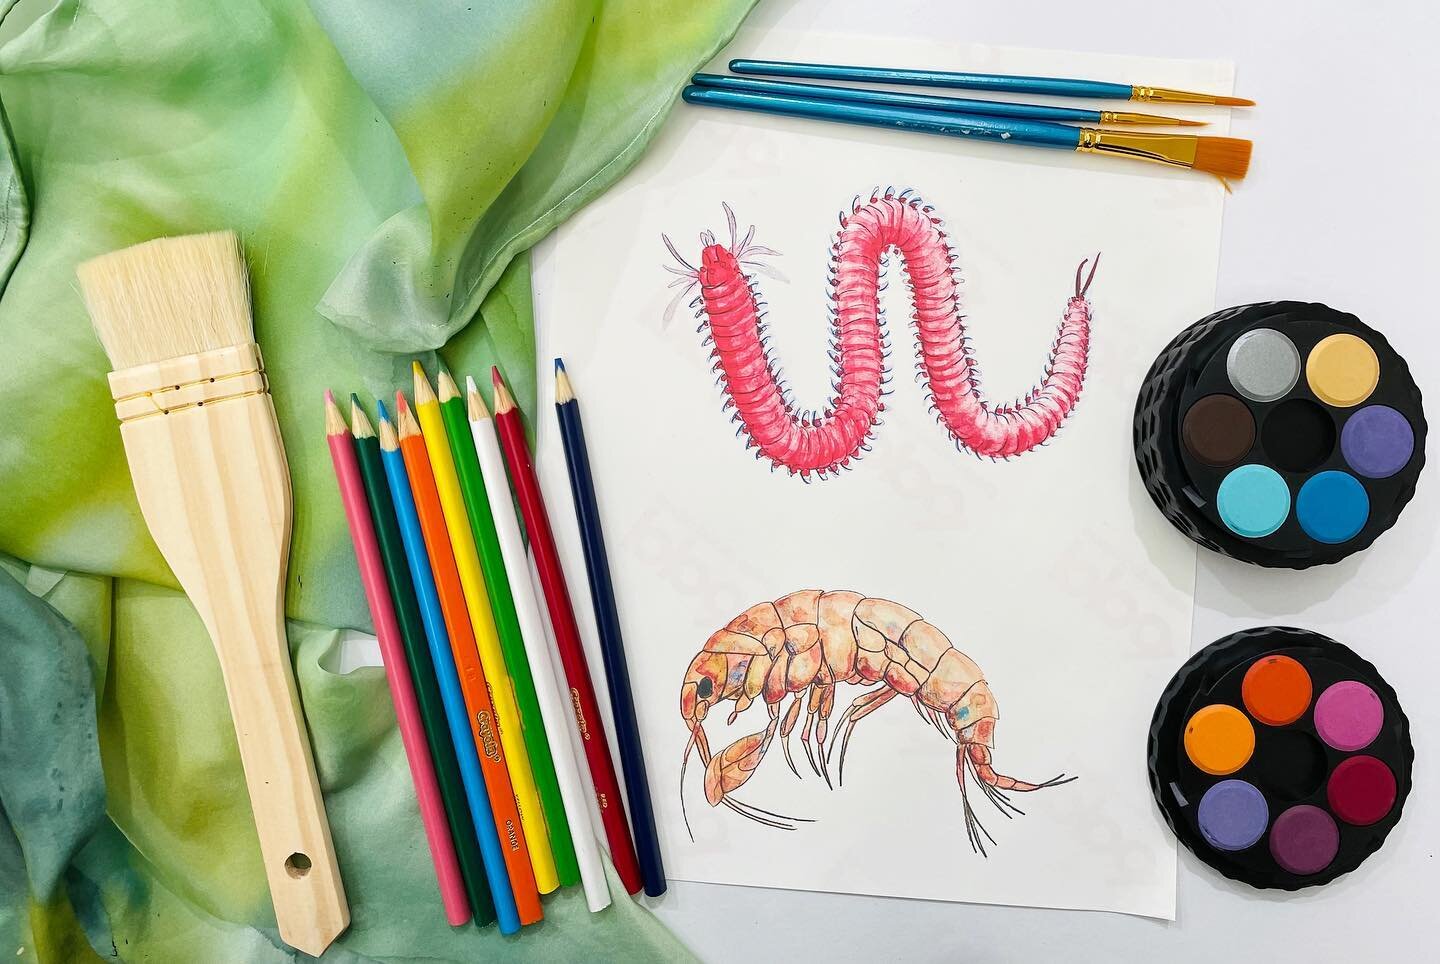 Our @nationalscienceweek project is all about merging #science and #art With the guidance of artist @lissfinney participants will be creating these beautiful scientific drawings which will find a home amongst a giant silk seagrass meadow. The pieces 